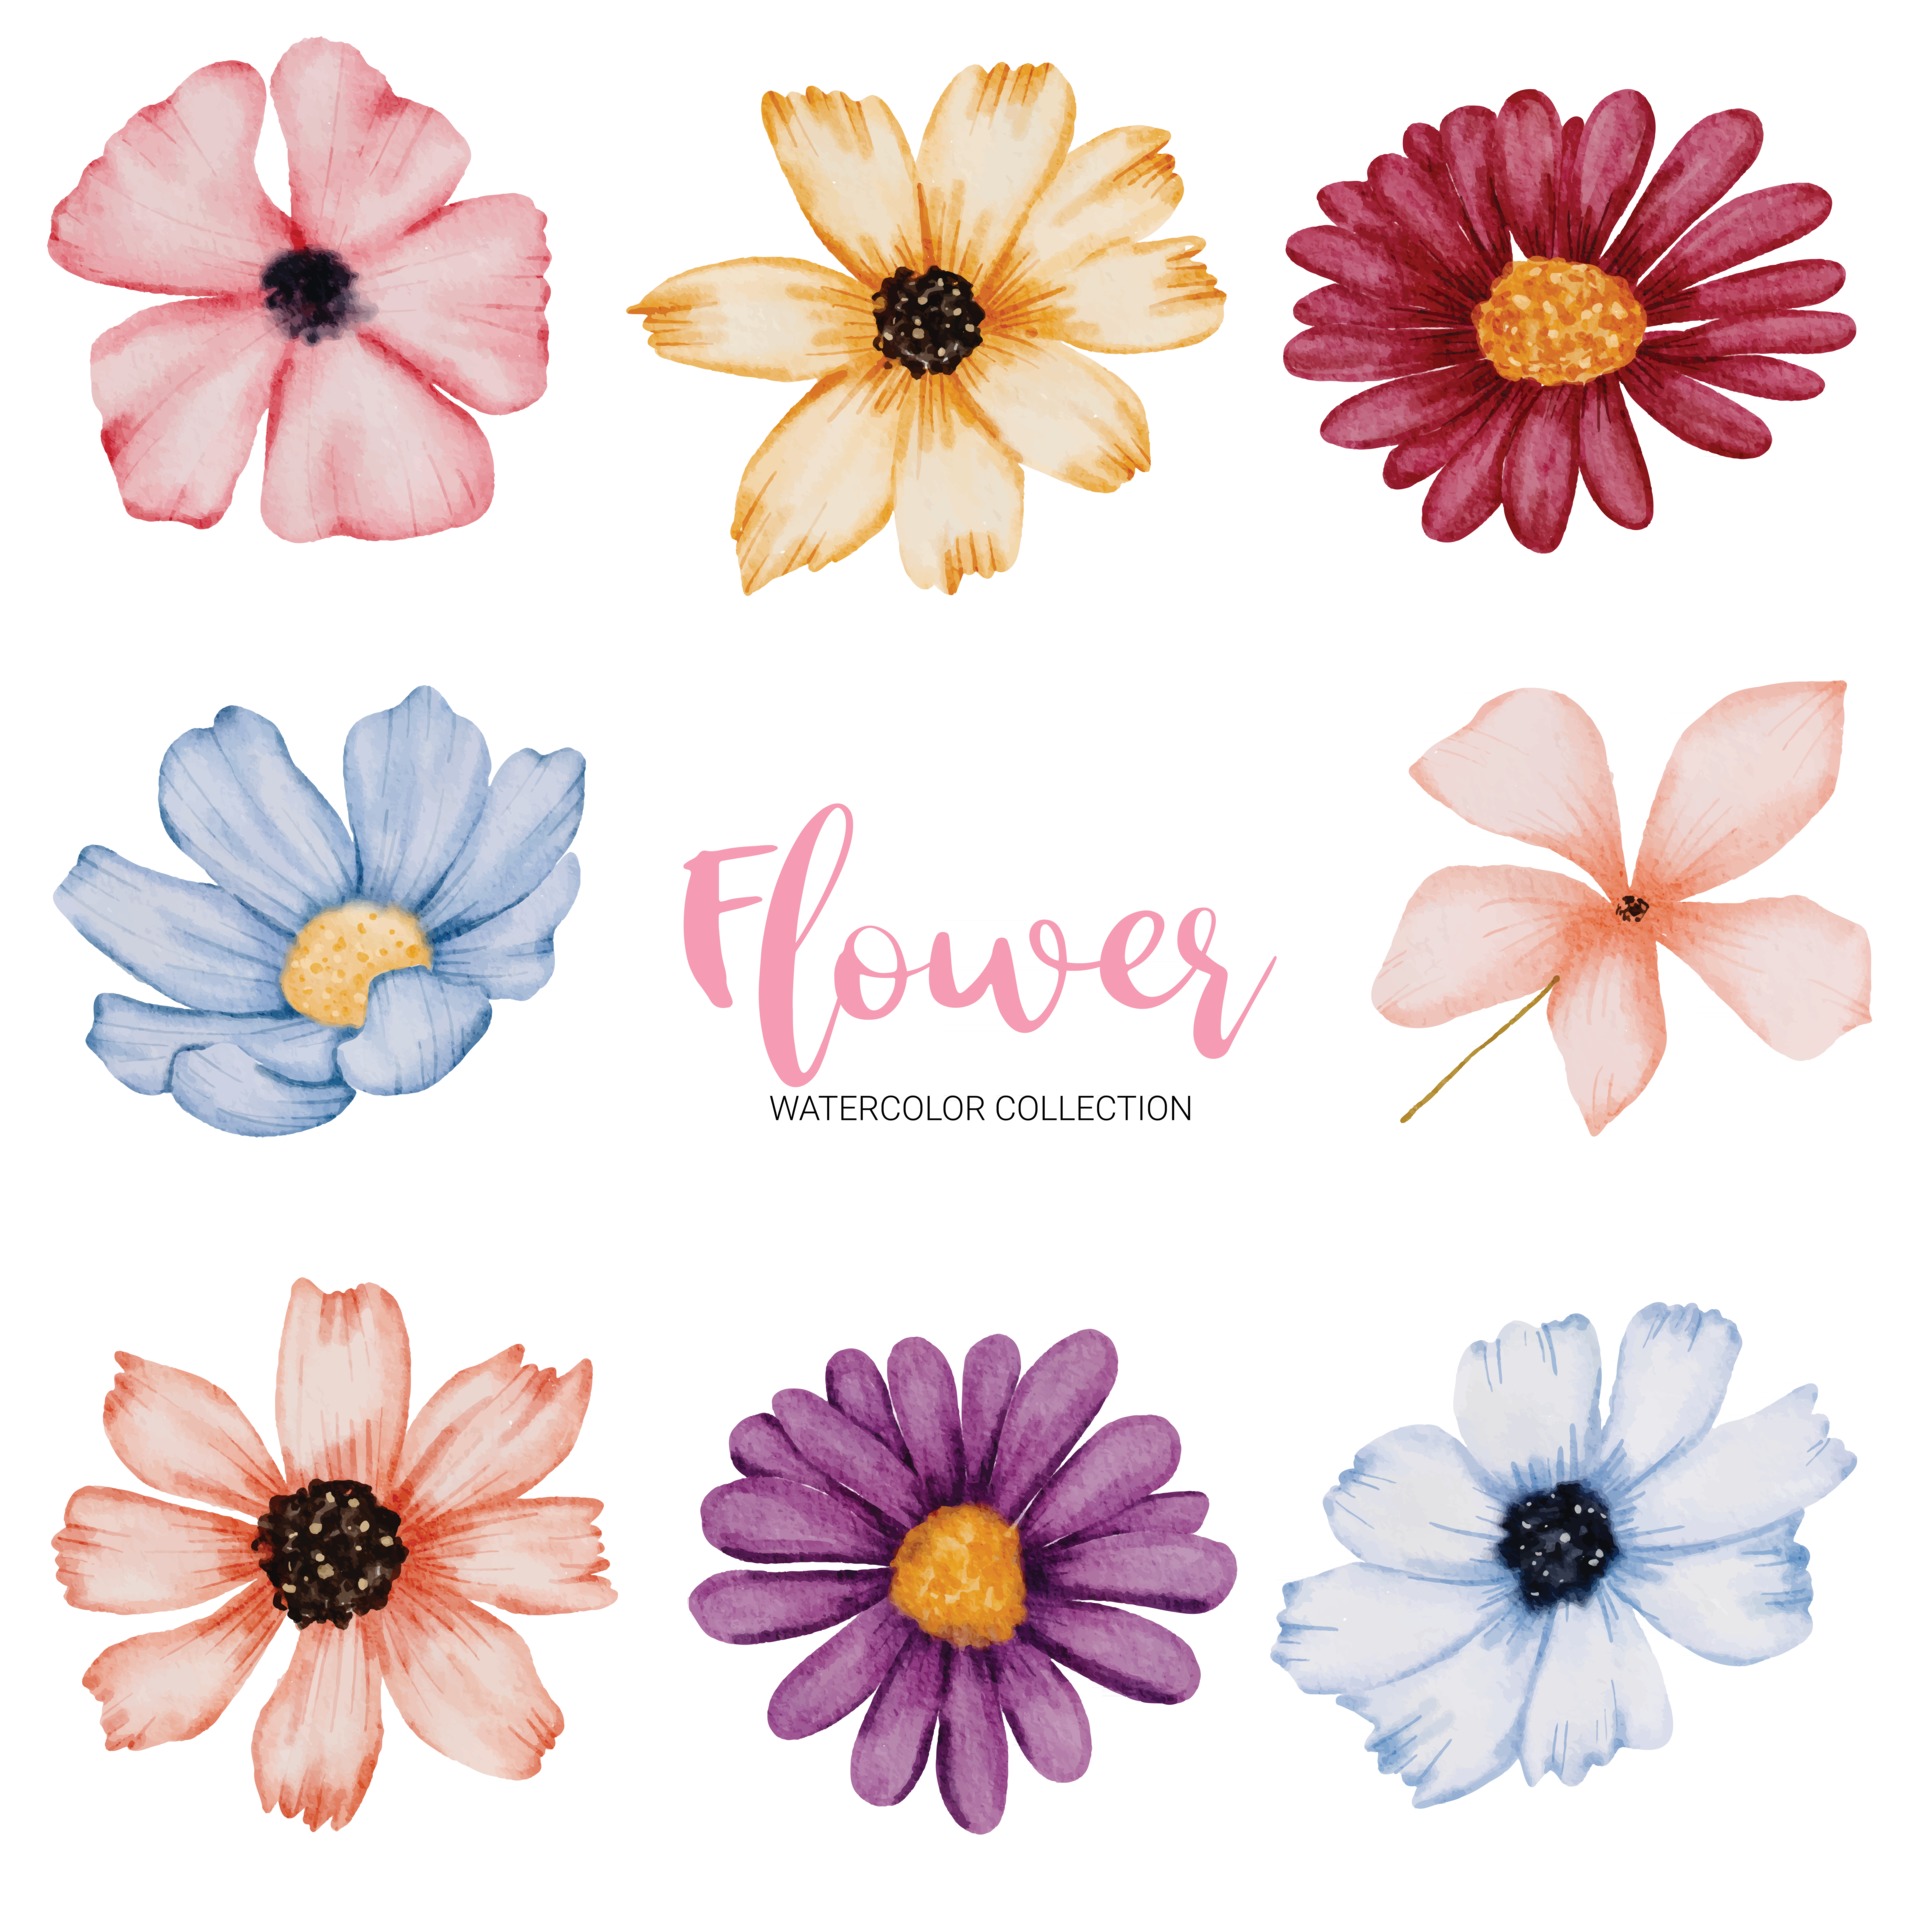 Many kinds of beautiful flowers in water color style 20 ...